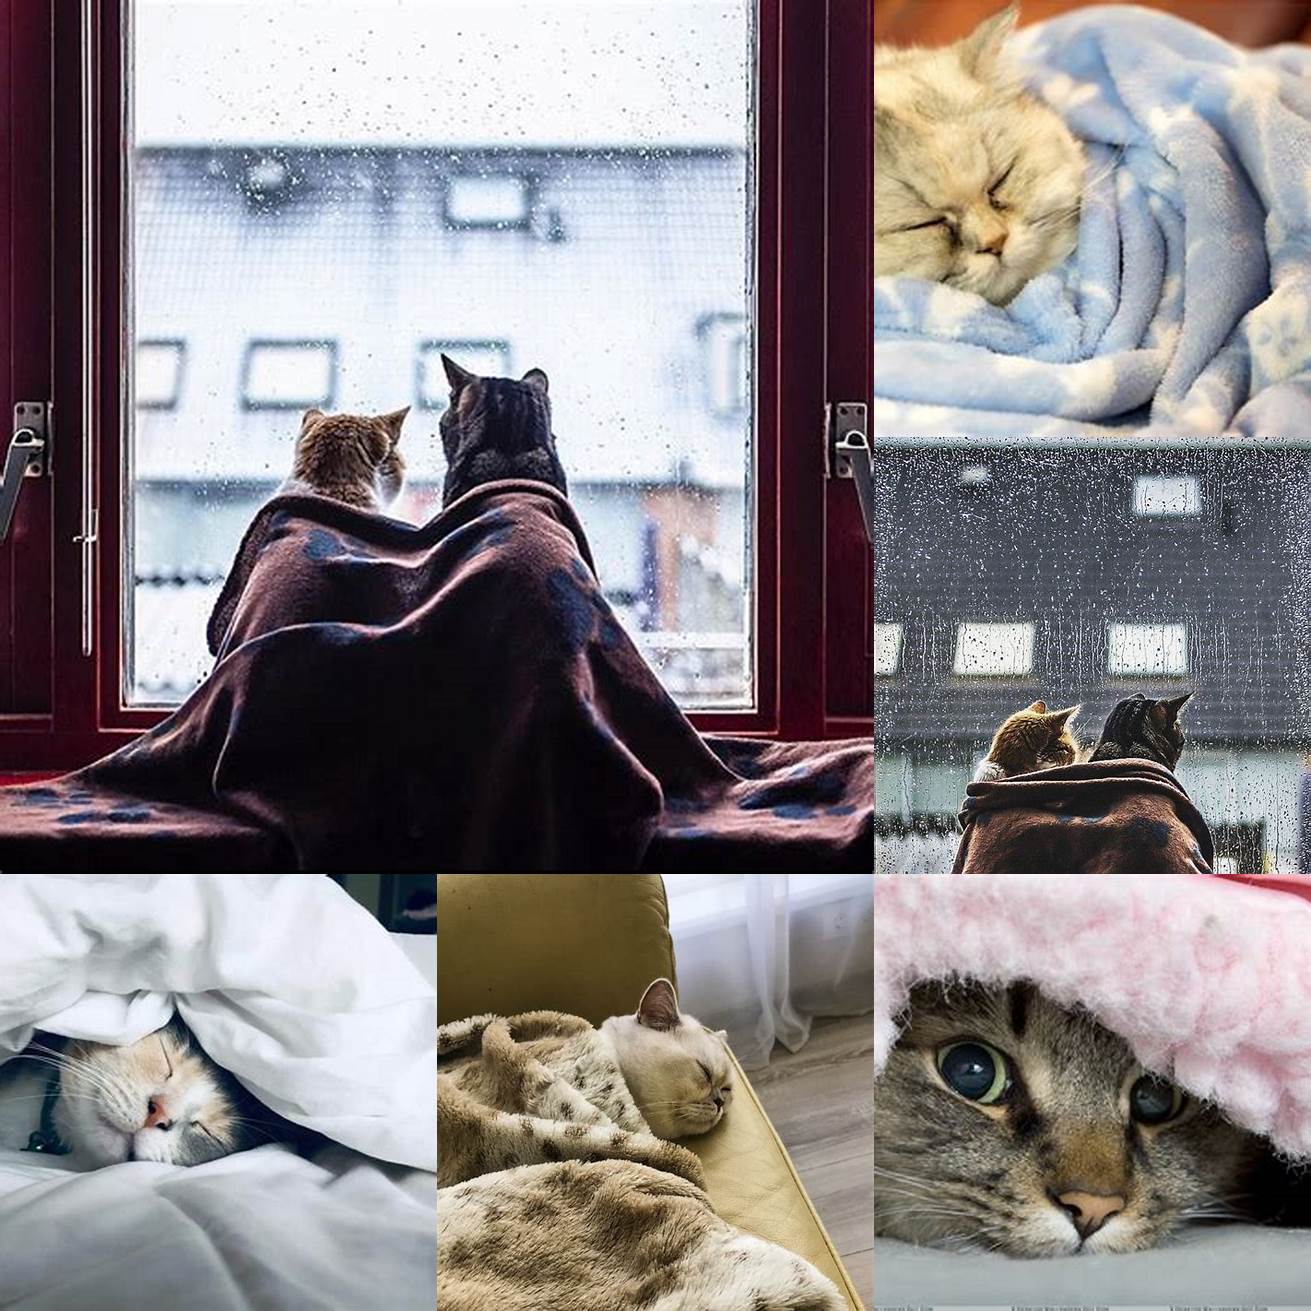 Cute cat and reader cuddling under a blanket on a rainy day